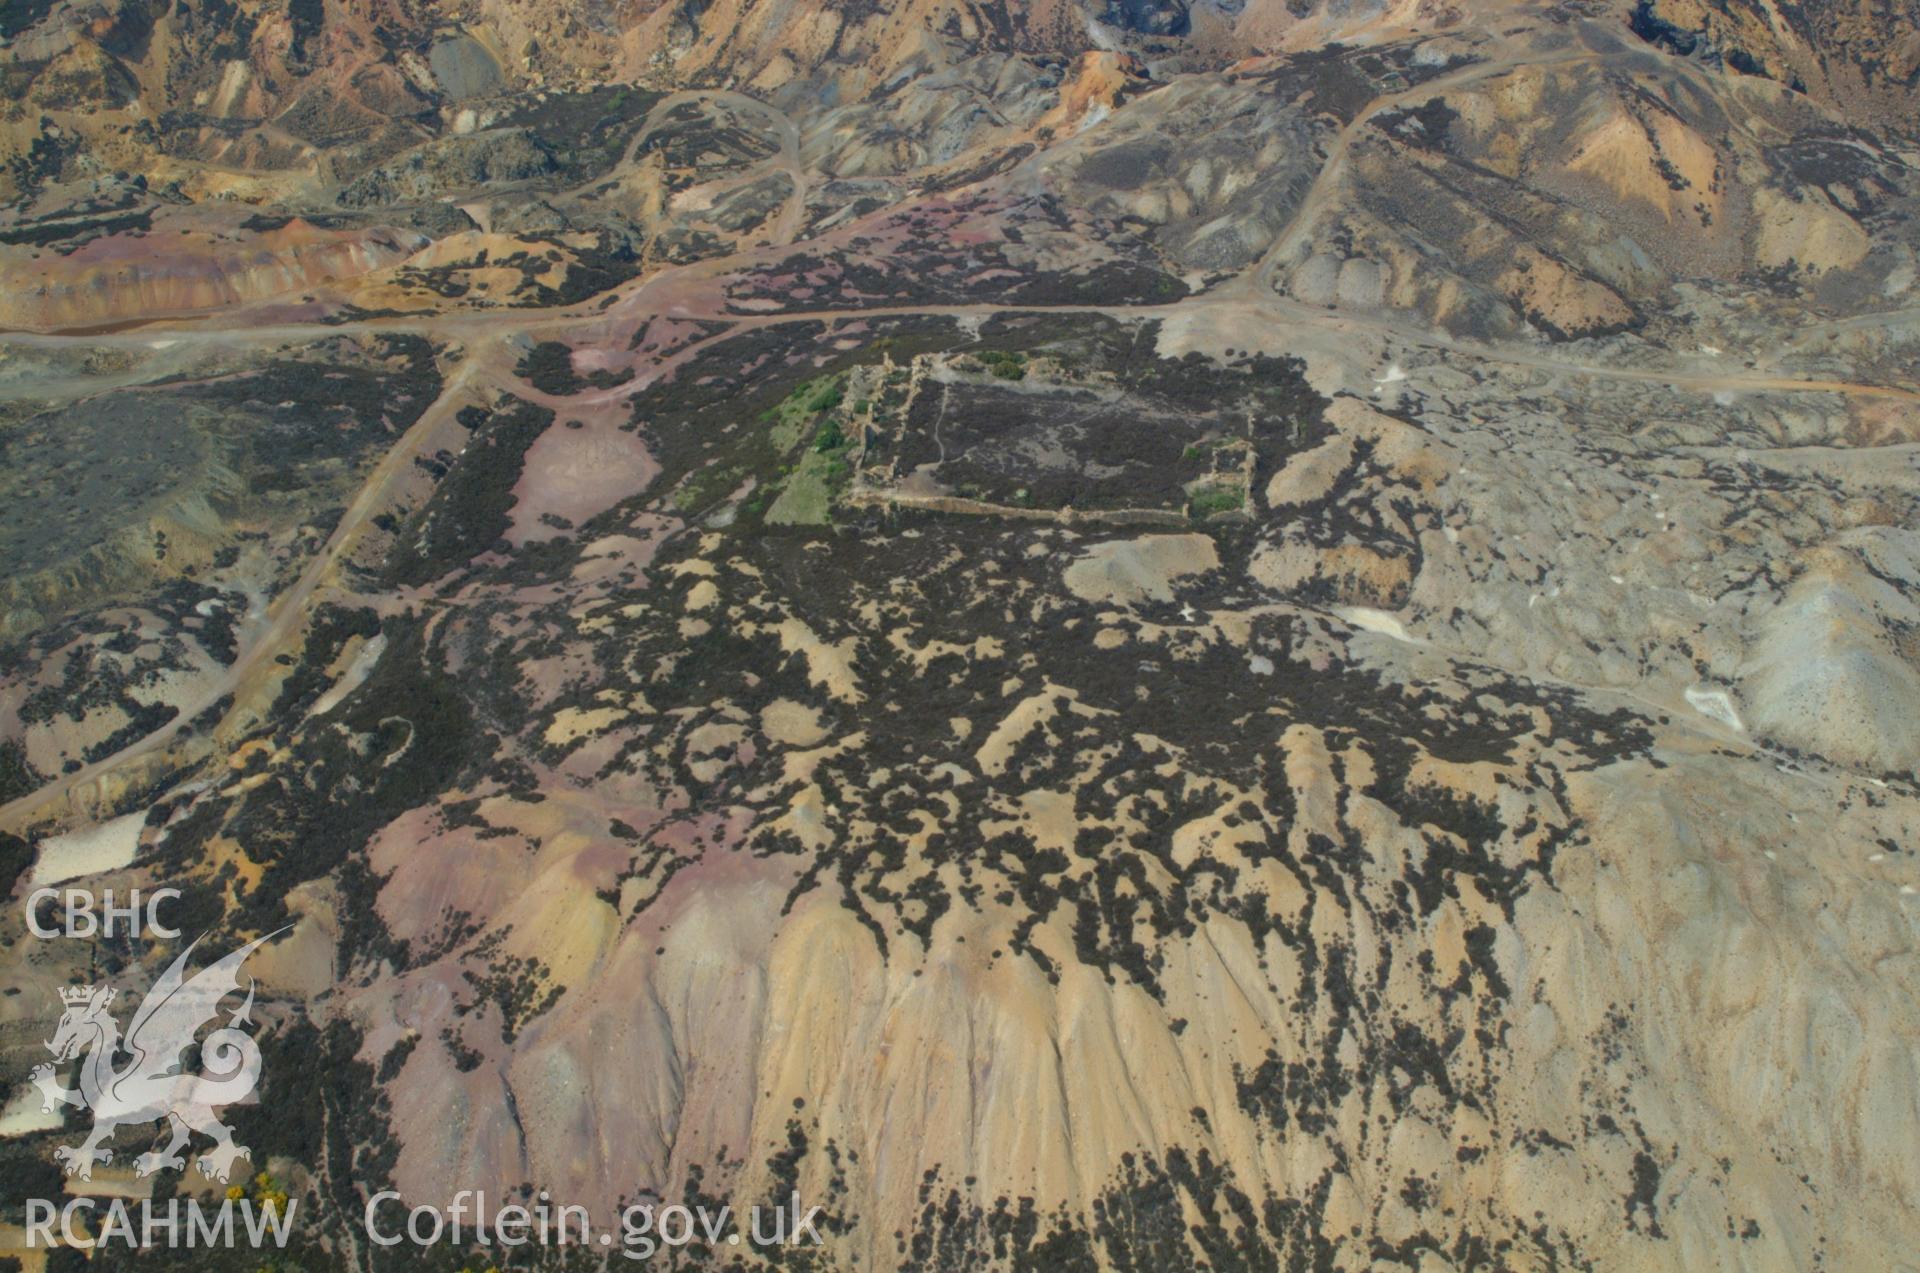 RCAHMW colour oblique aerial photograph of outline of buildings, Parys Mountain. Taken on 26 May 2004 by Toby Driver